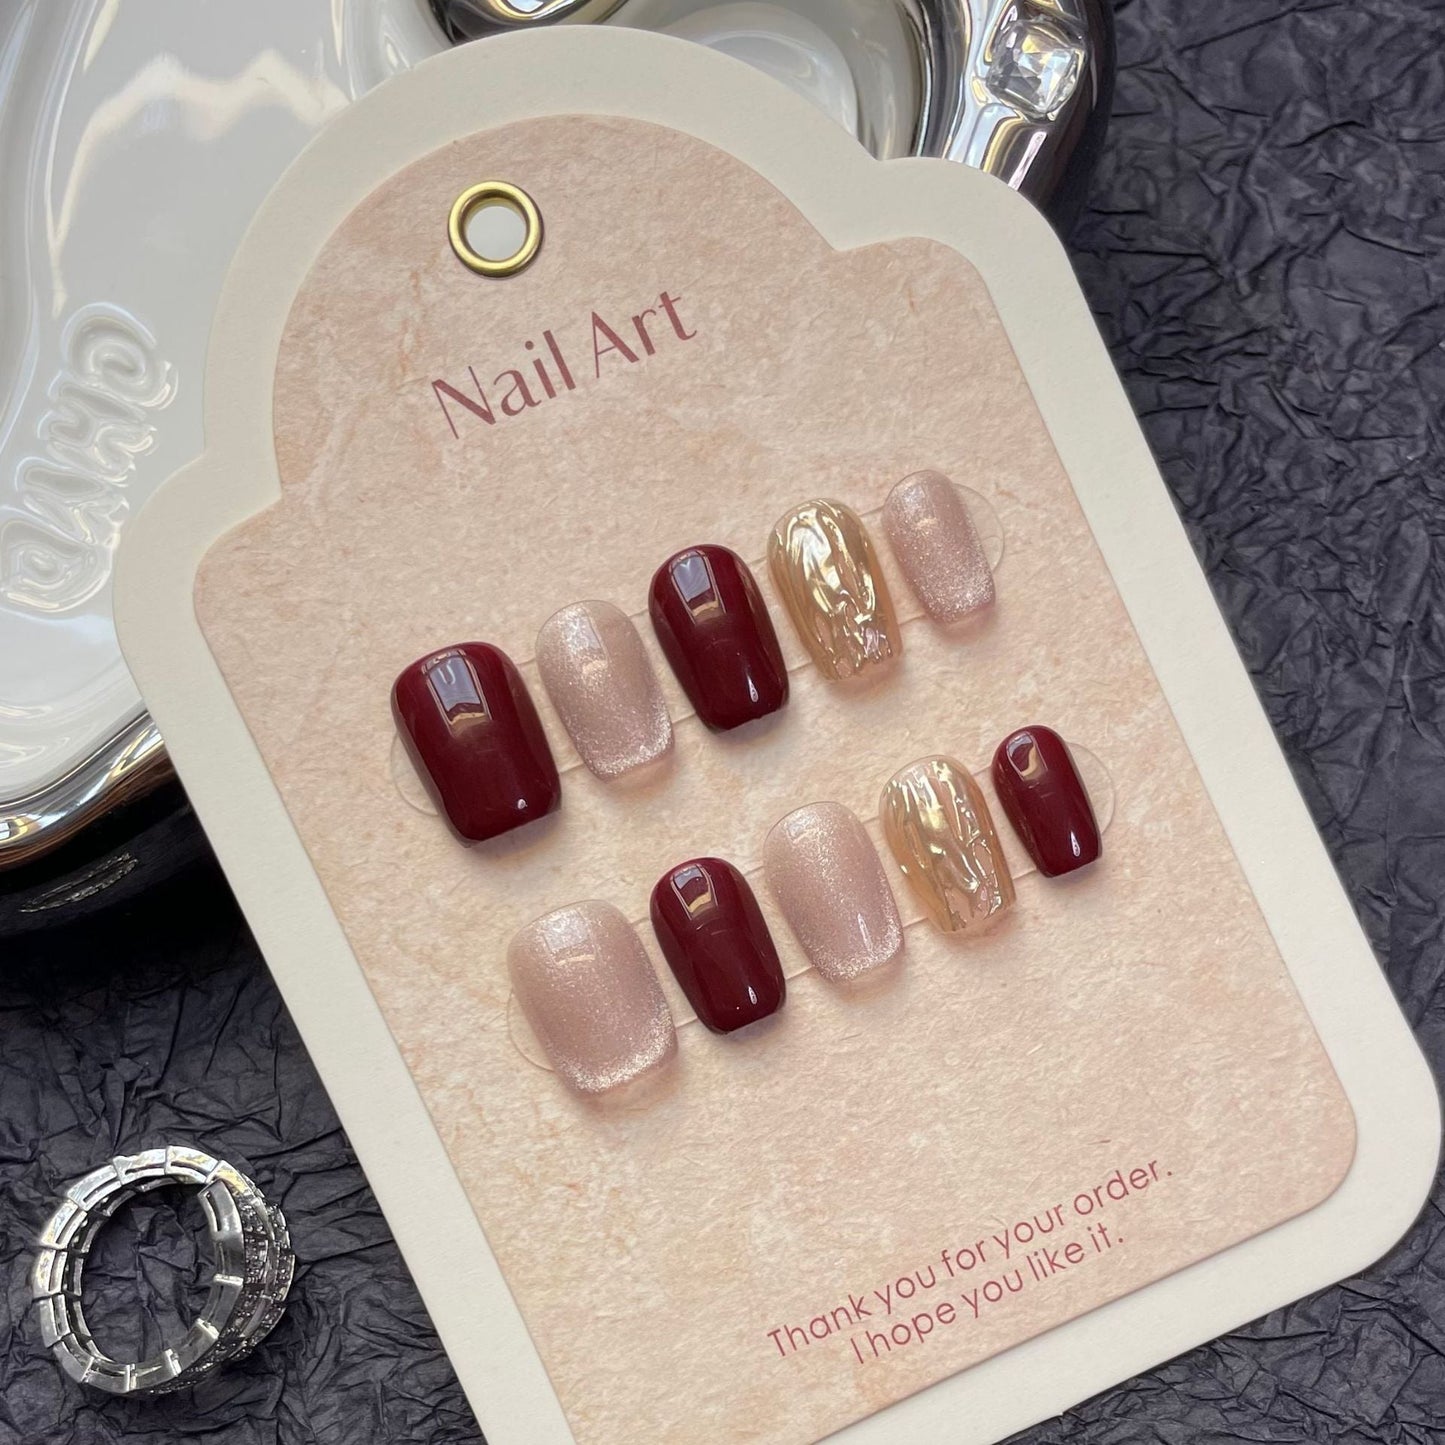 1211 Cateye Effect style press on nails 100% handmade false nails red golden pink